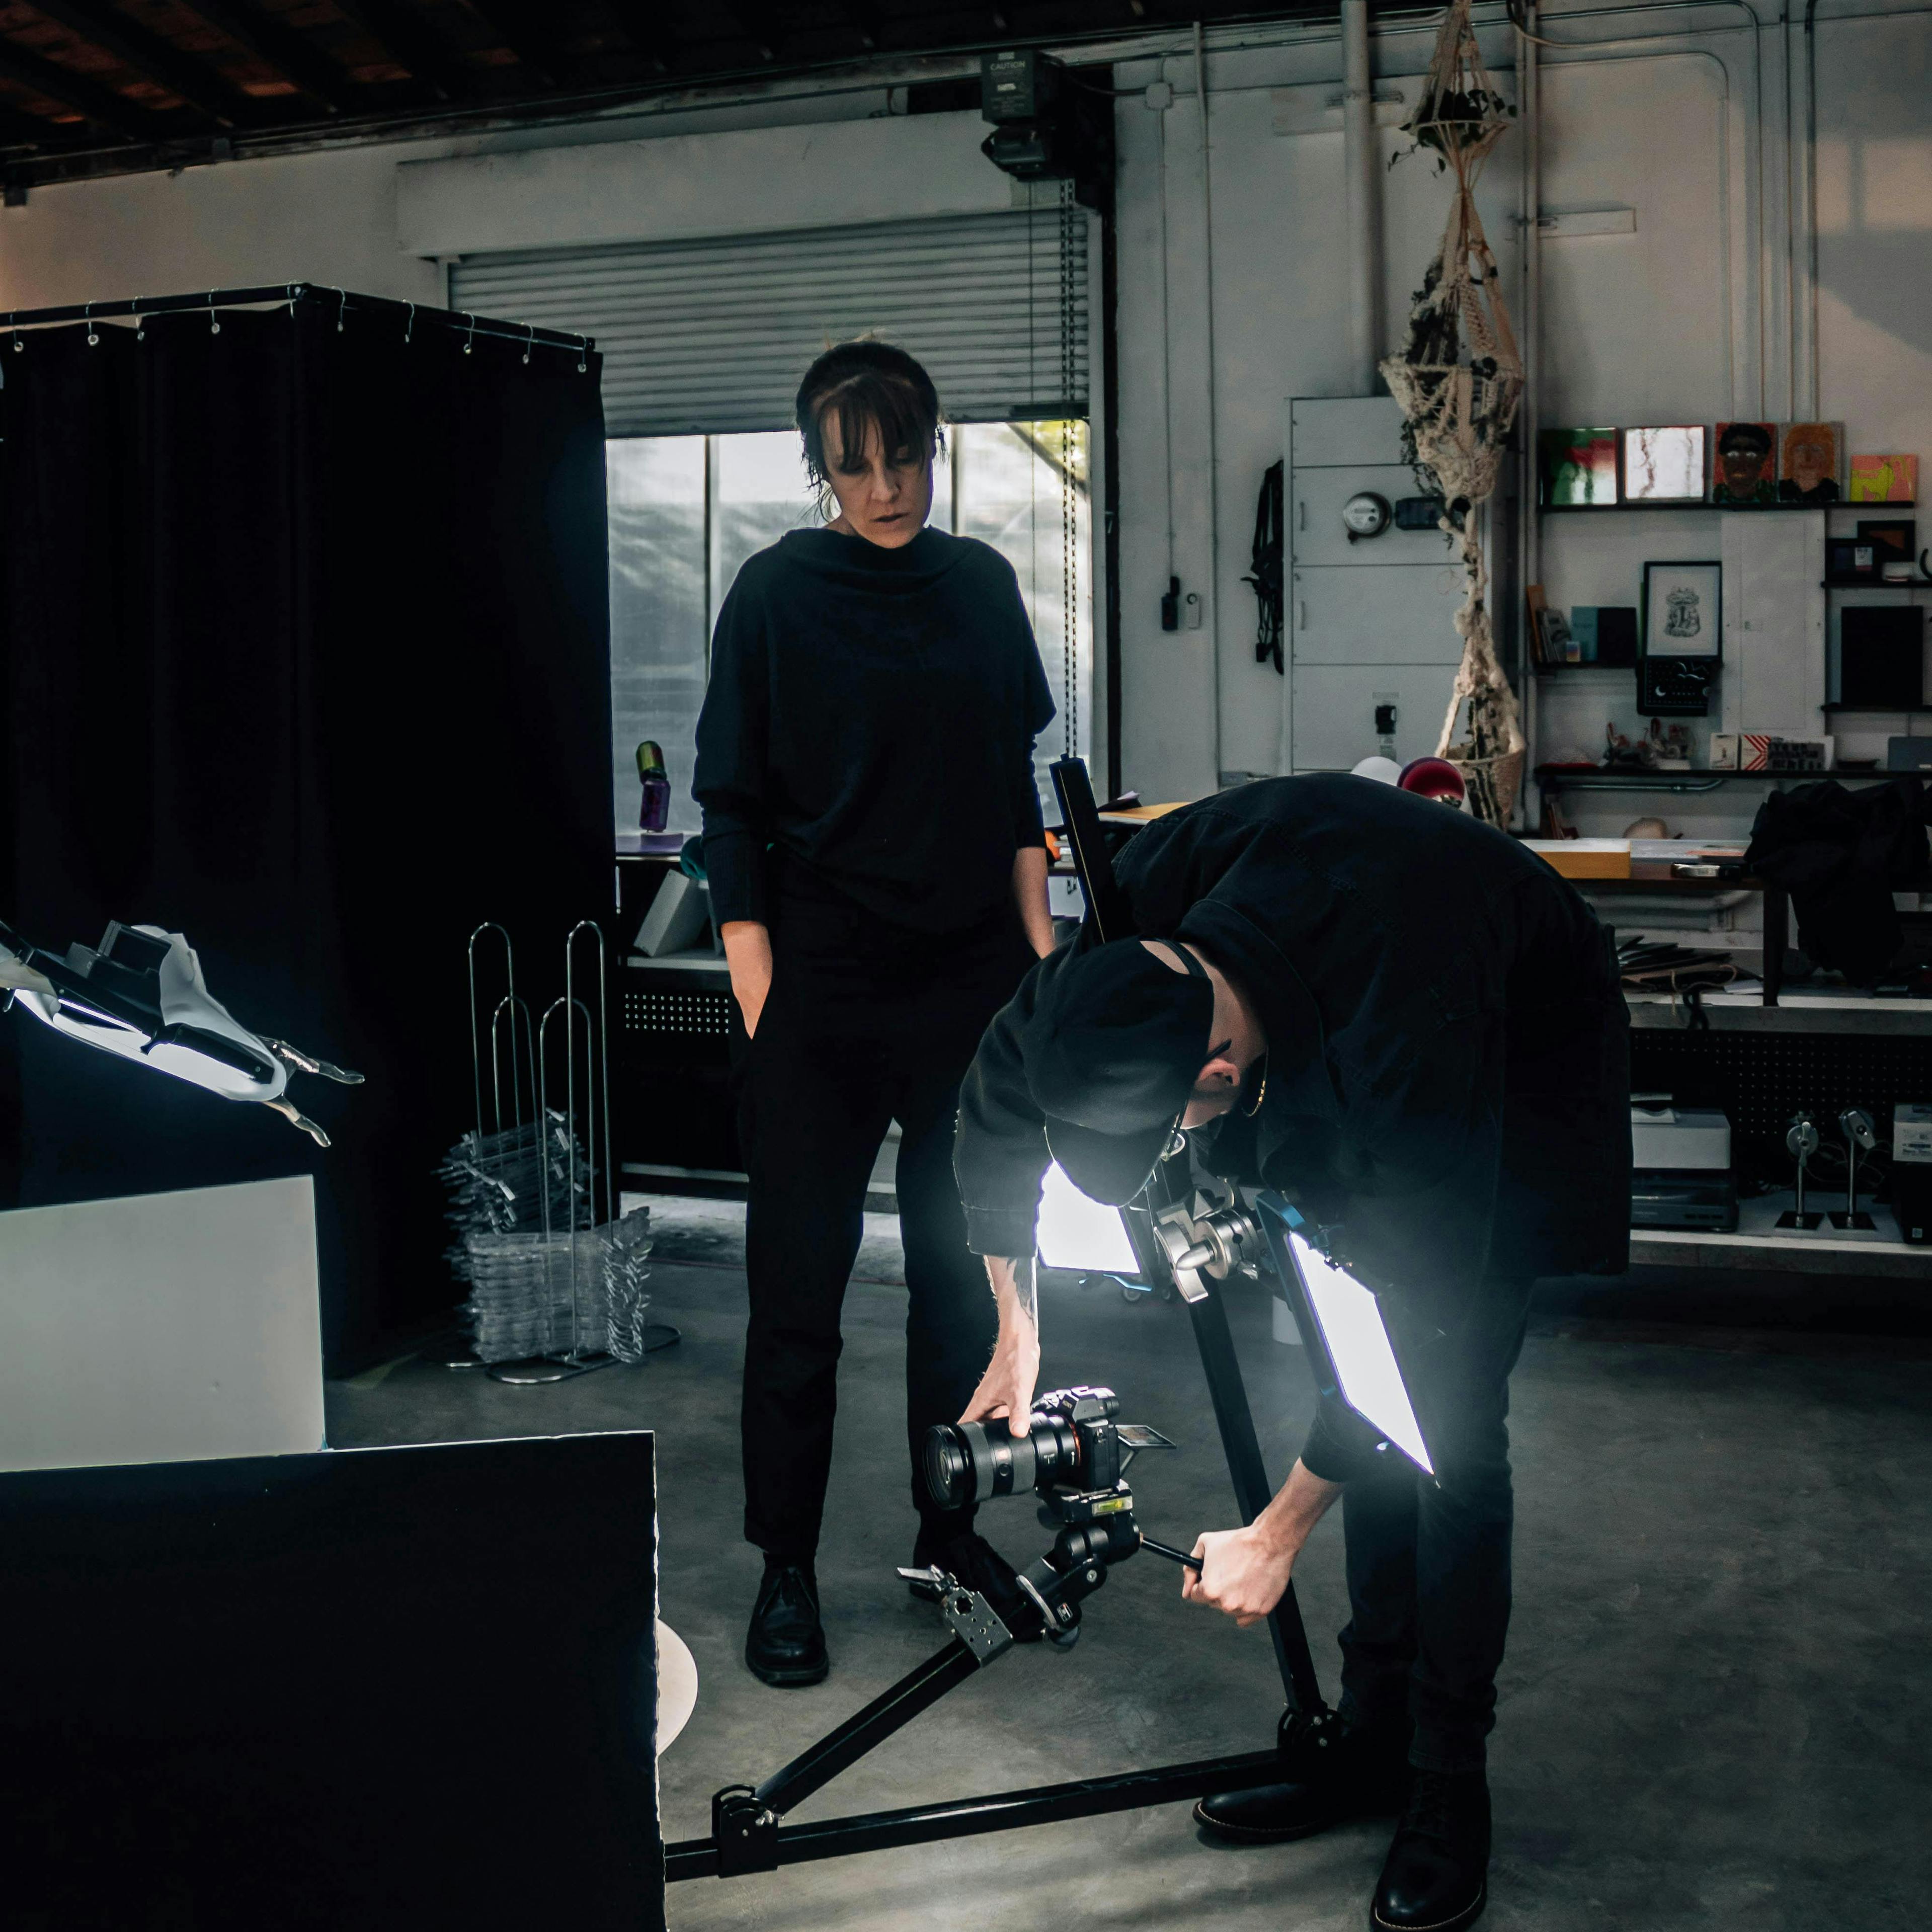 Two photographers working together on a 360 rig in a photography studio. One photographer is adjusting the rig while the other is framing the shot. The studio is well-lit and filled with photography equipment, including lights, reflectors, and cameras.